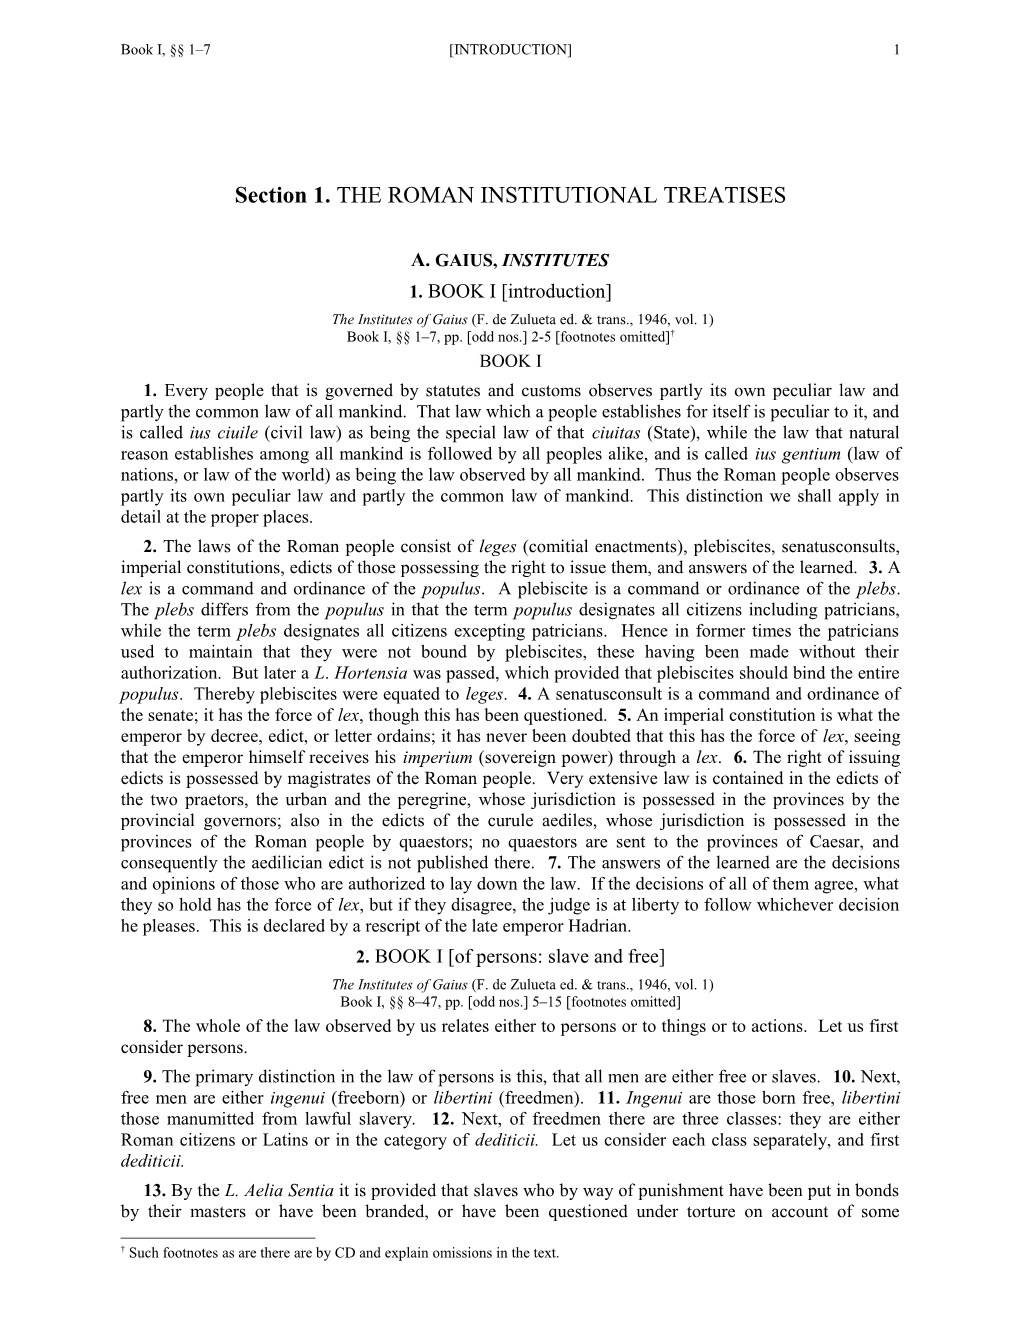 Section 1. the ROMAN INSTITUTIONAL TREATISES